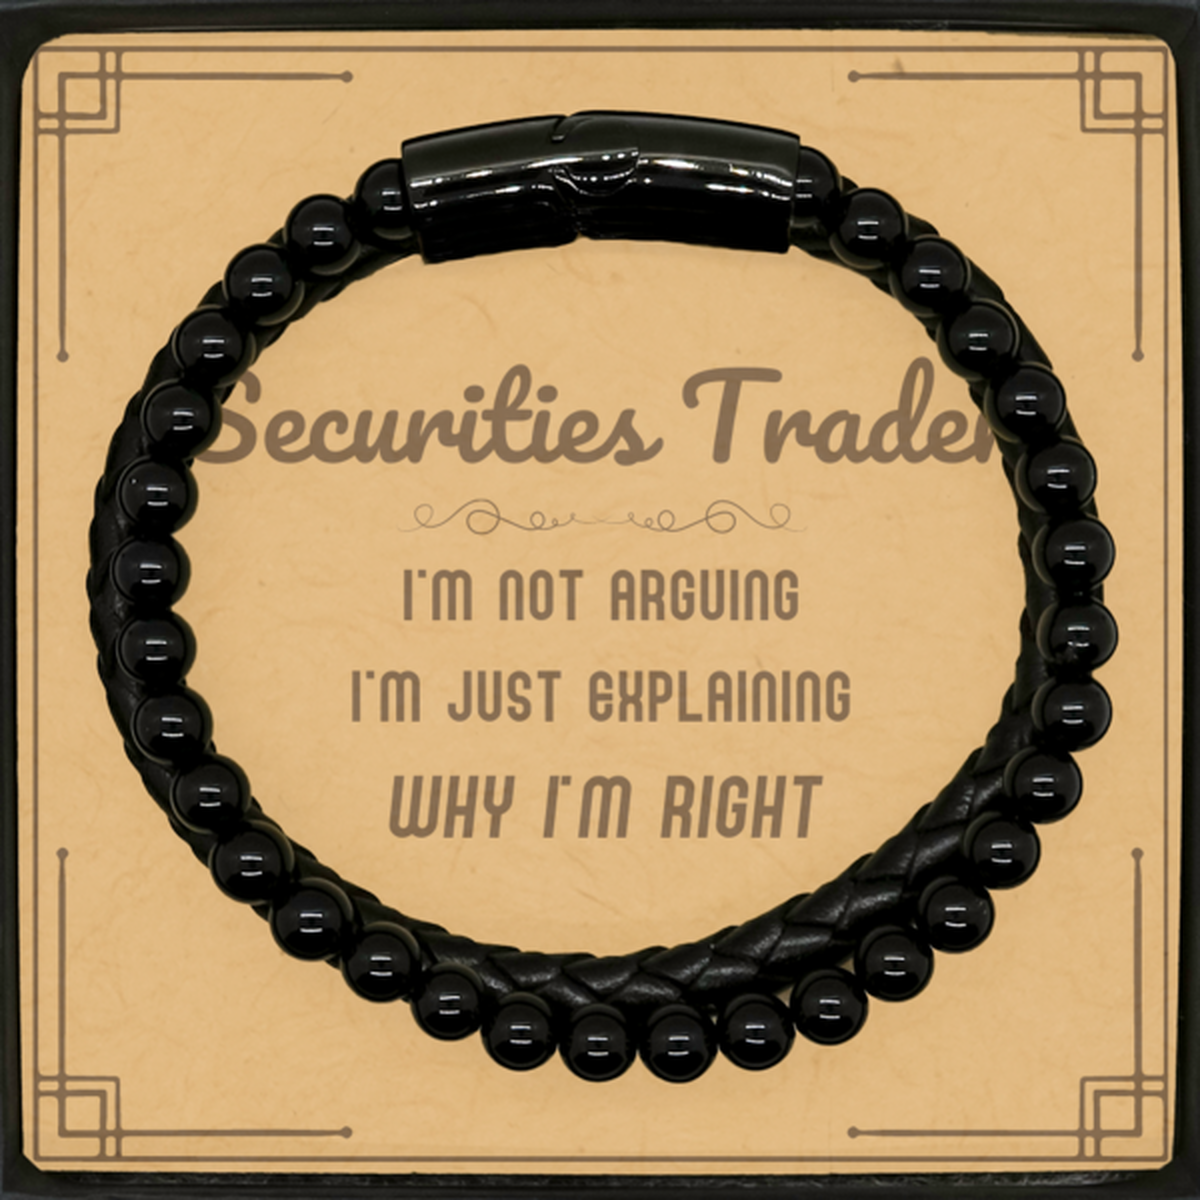 Securities Trader I'm not Arguing. I'm Just Explaining Why I'm RIGHT Stone Leather Bracelets, Funny Saying Quote Securities Trader Gifts For Securities Trader Message Card Graduation Birthday Christmas Gifts for Men Women Coworker